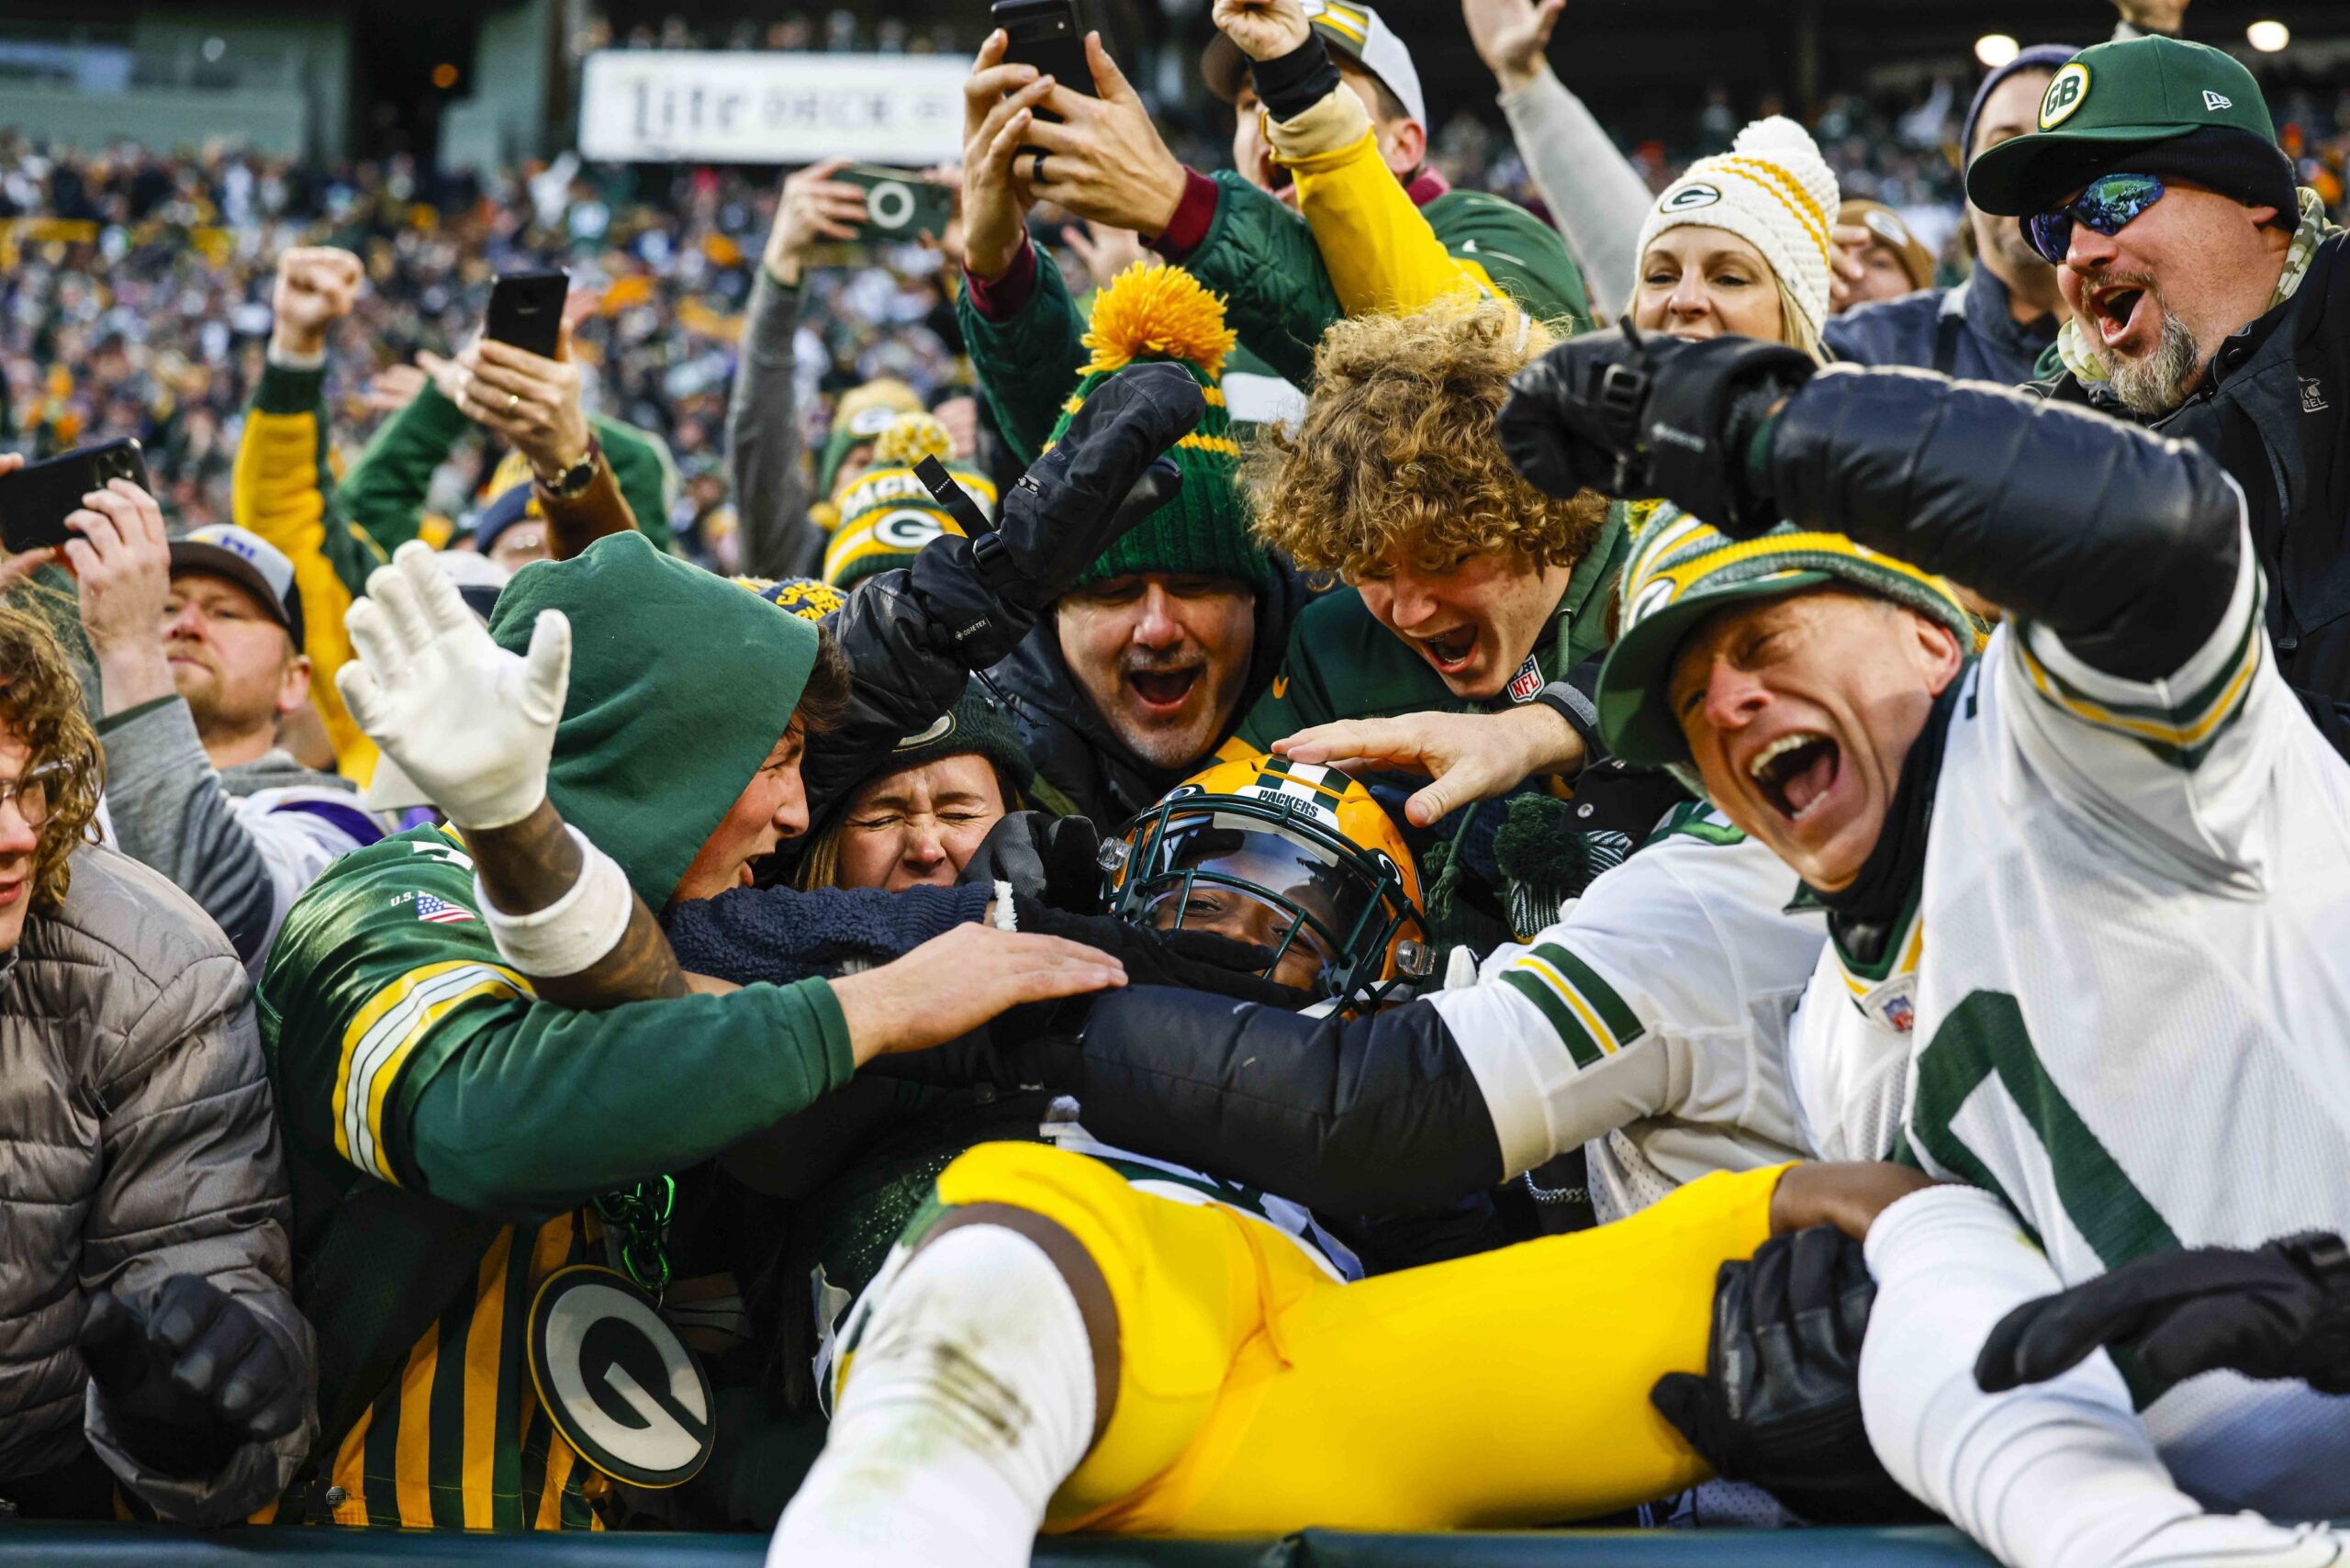 ‘Momentum is a really powerful thing’: The Packers are 1 win away from clinching a playoff spot